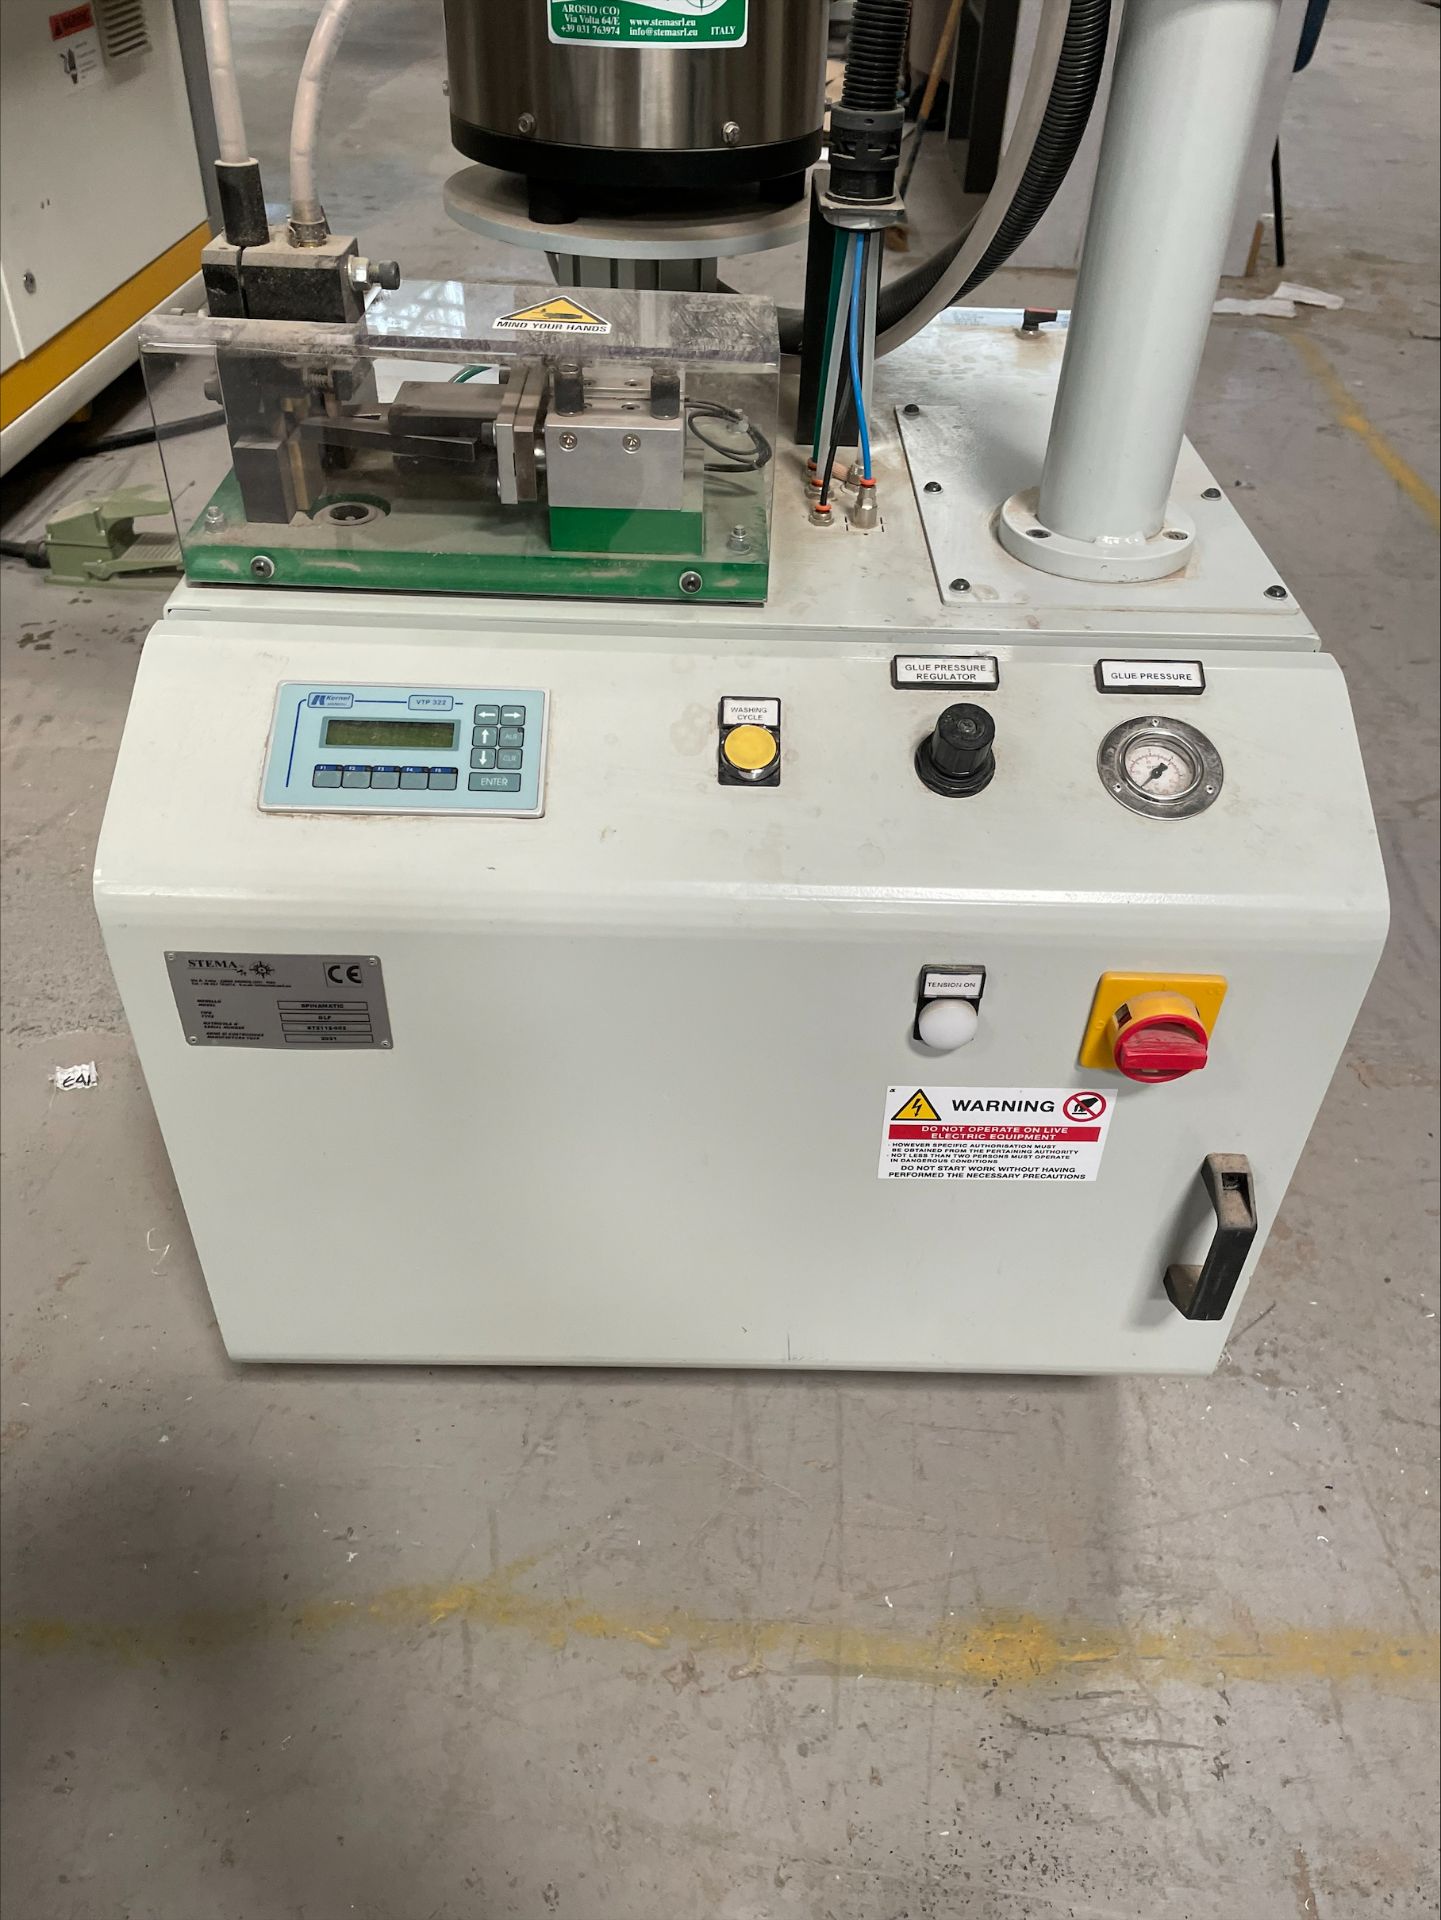 Stema Spinamatic GLF Drilling & dowel insertion machine, Serial No. ST2112-002 (2021) (Purchased new - Image 2 of 7